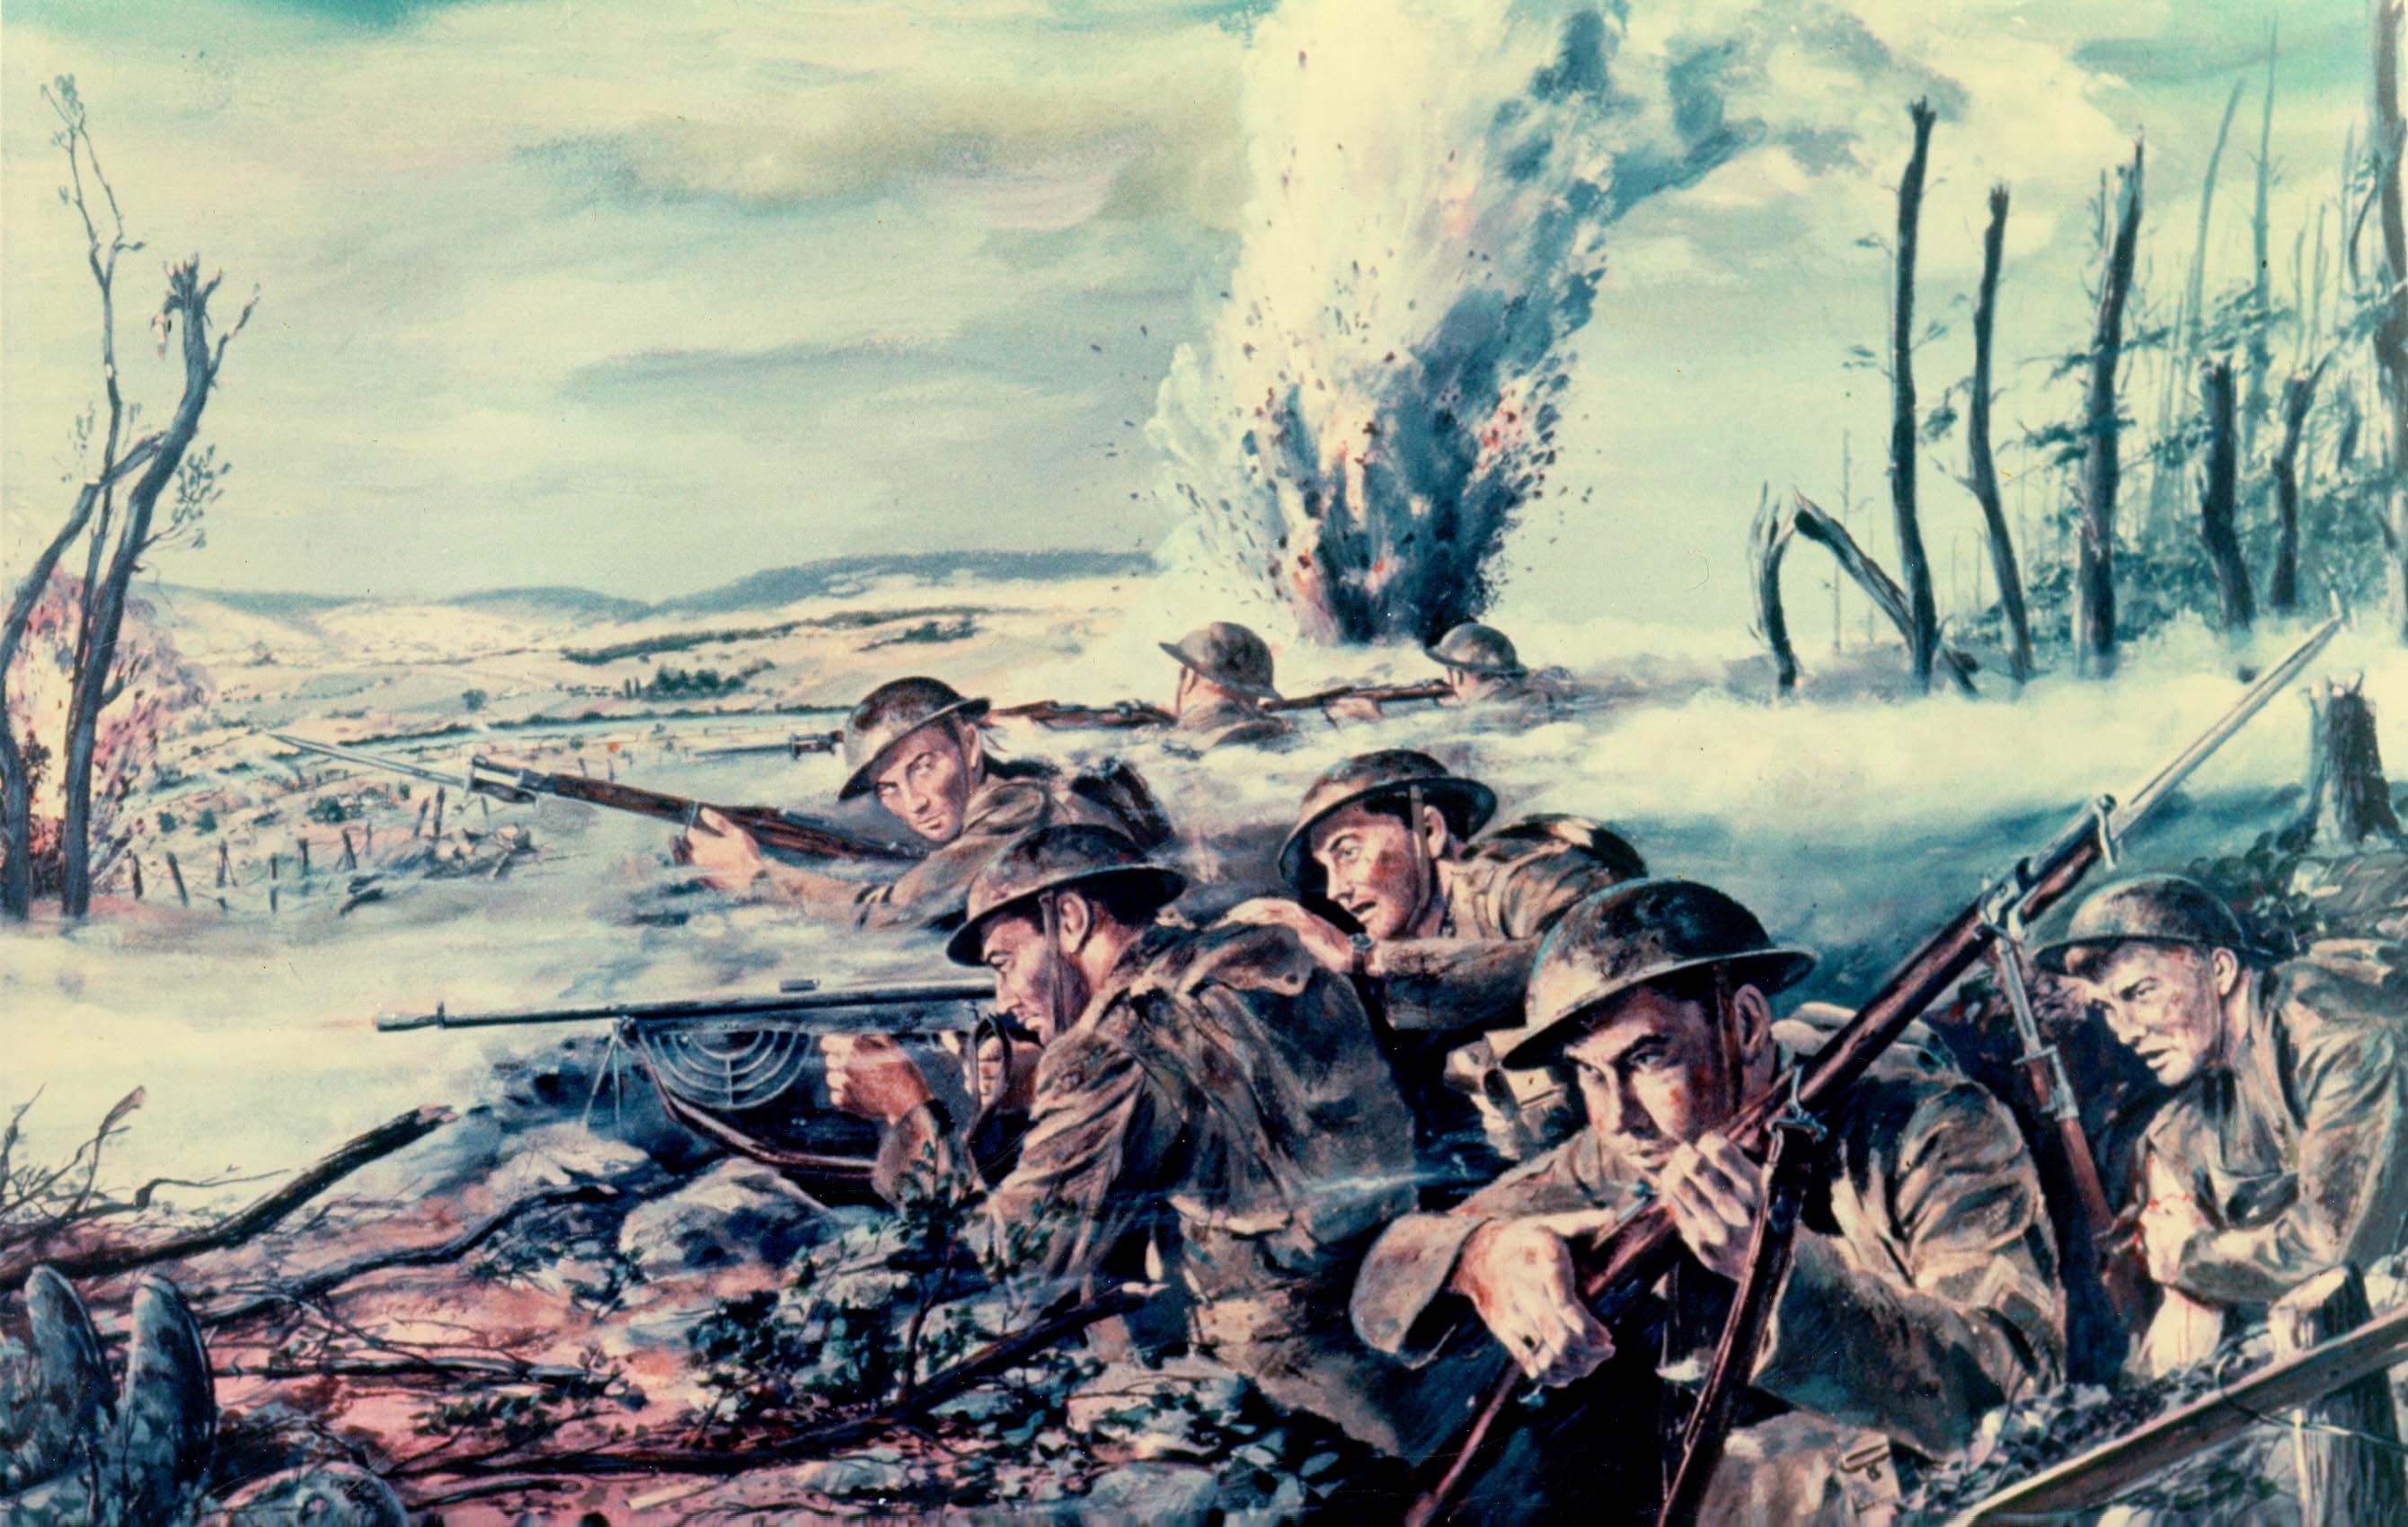 US Army to Spend 600K on World War I Art